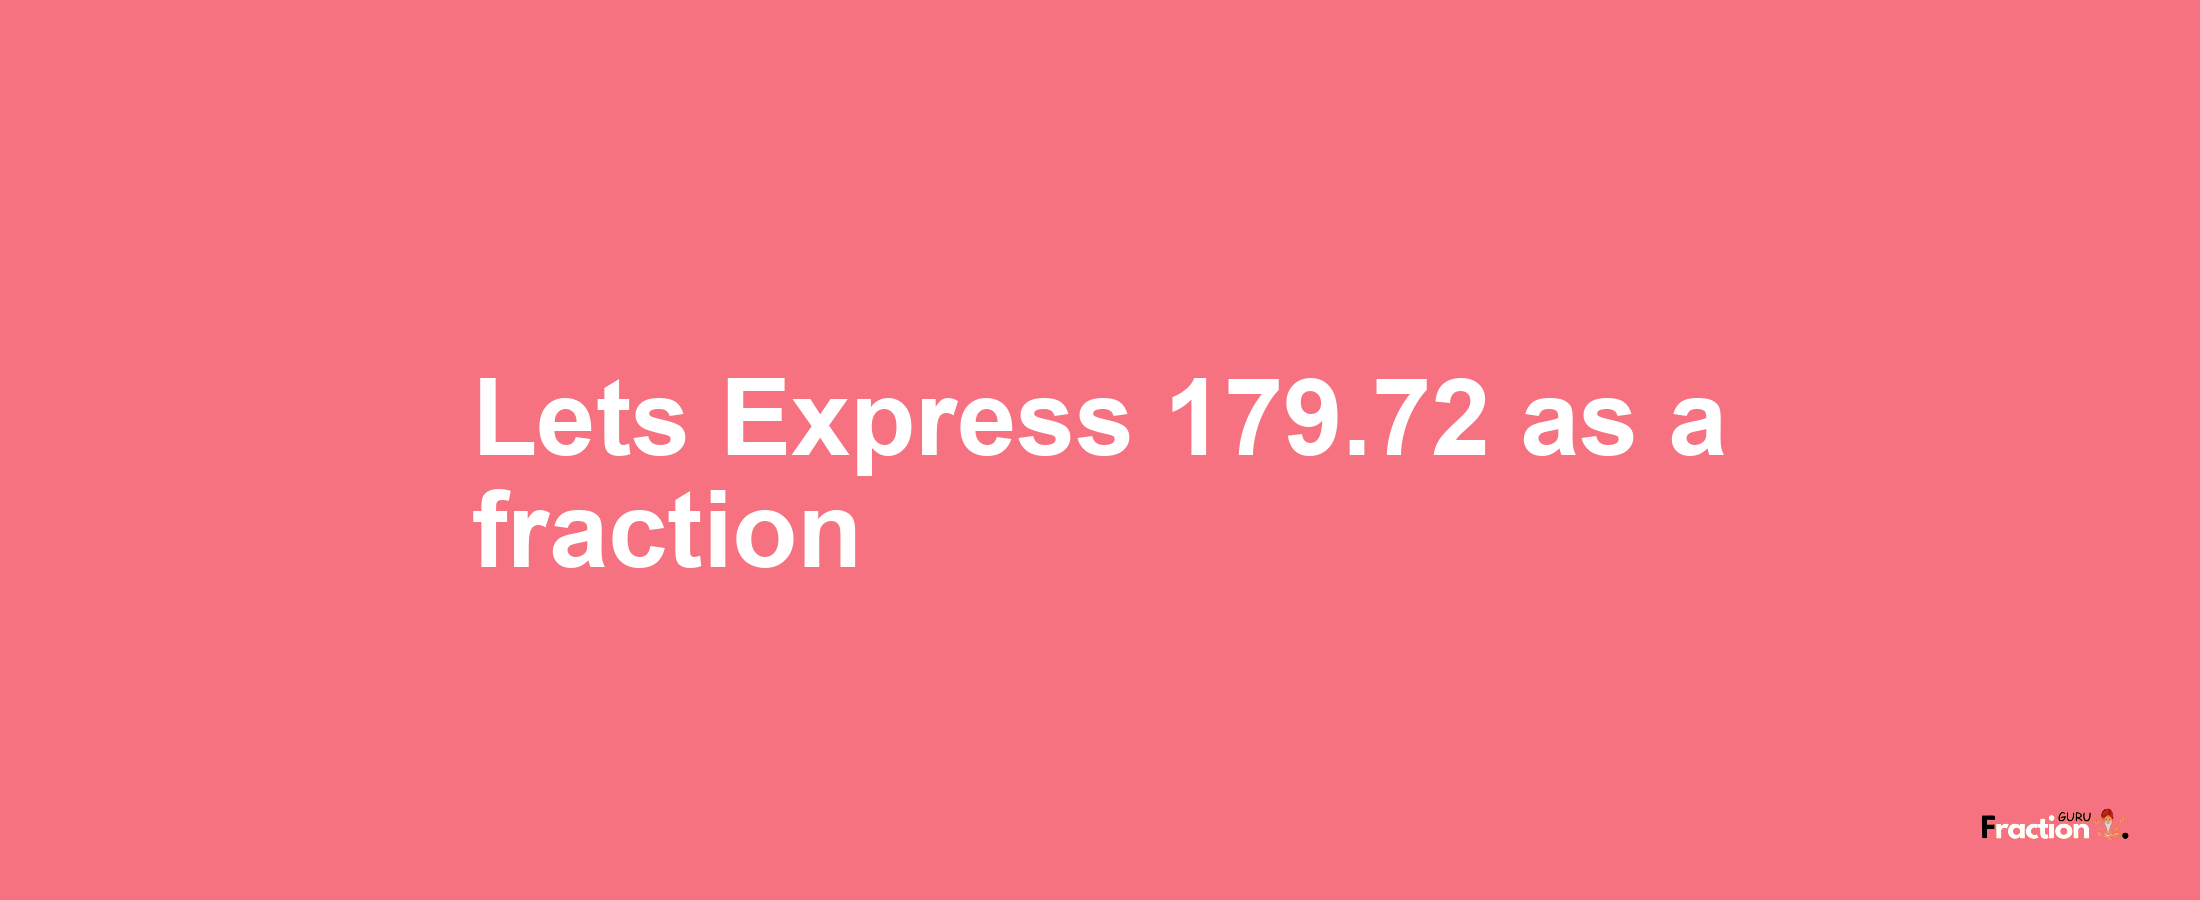 Lets Express 179.72 as afraction